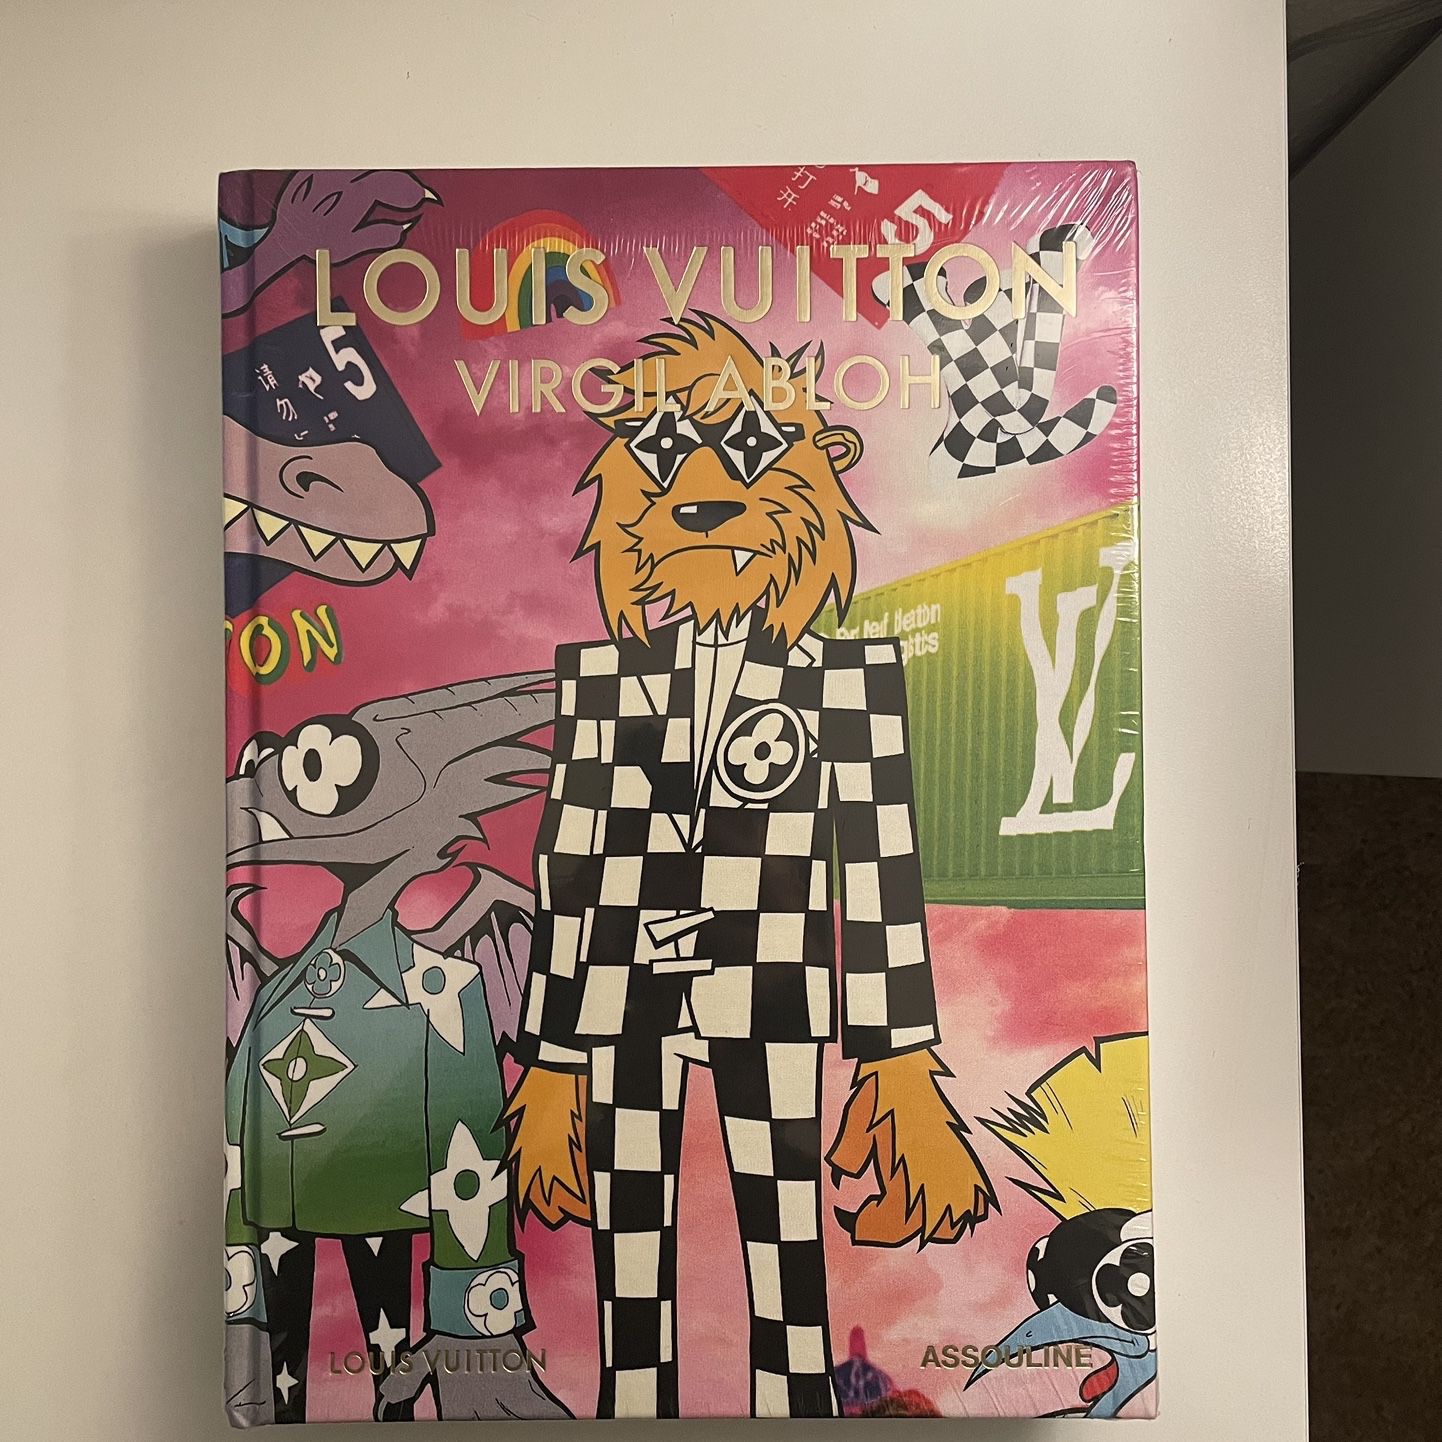 Louis Vuitton: Virgil Abloh (Classic Cartoon Cover) for Sale in Whittier,  CA - OfferUp